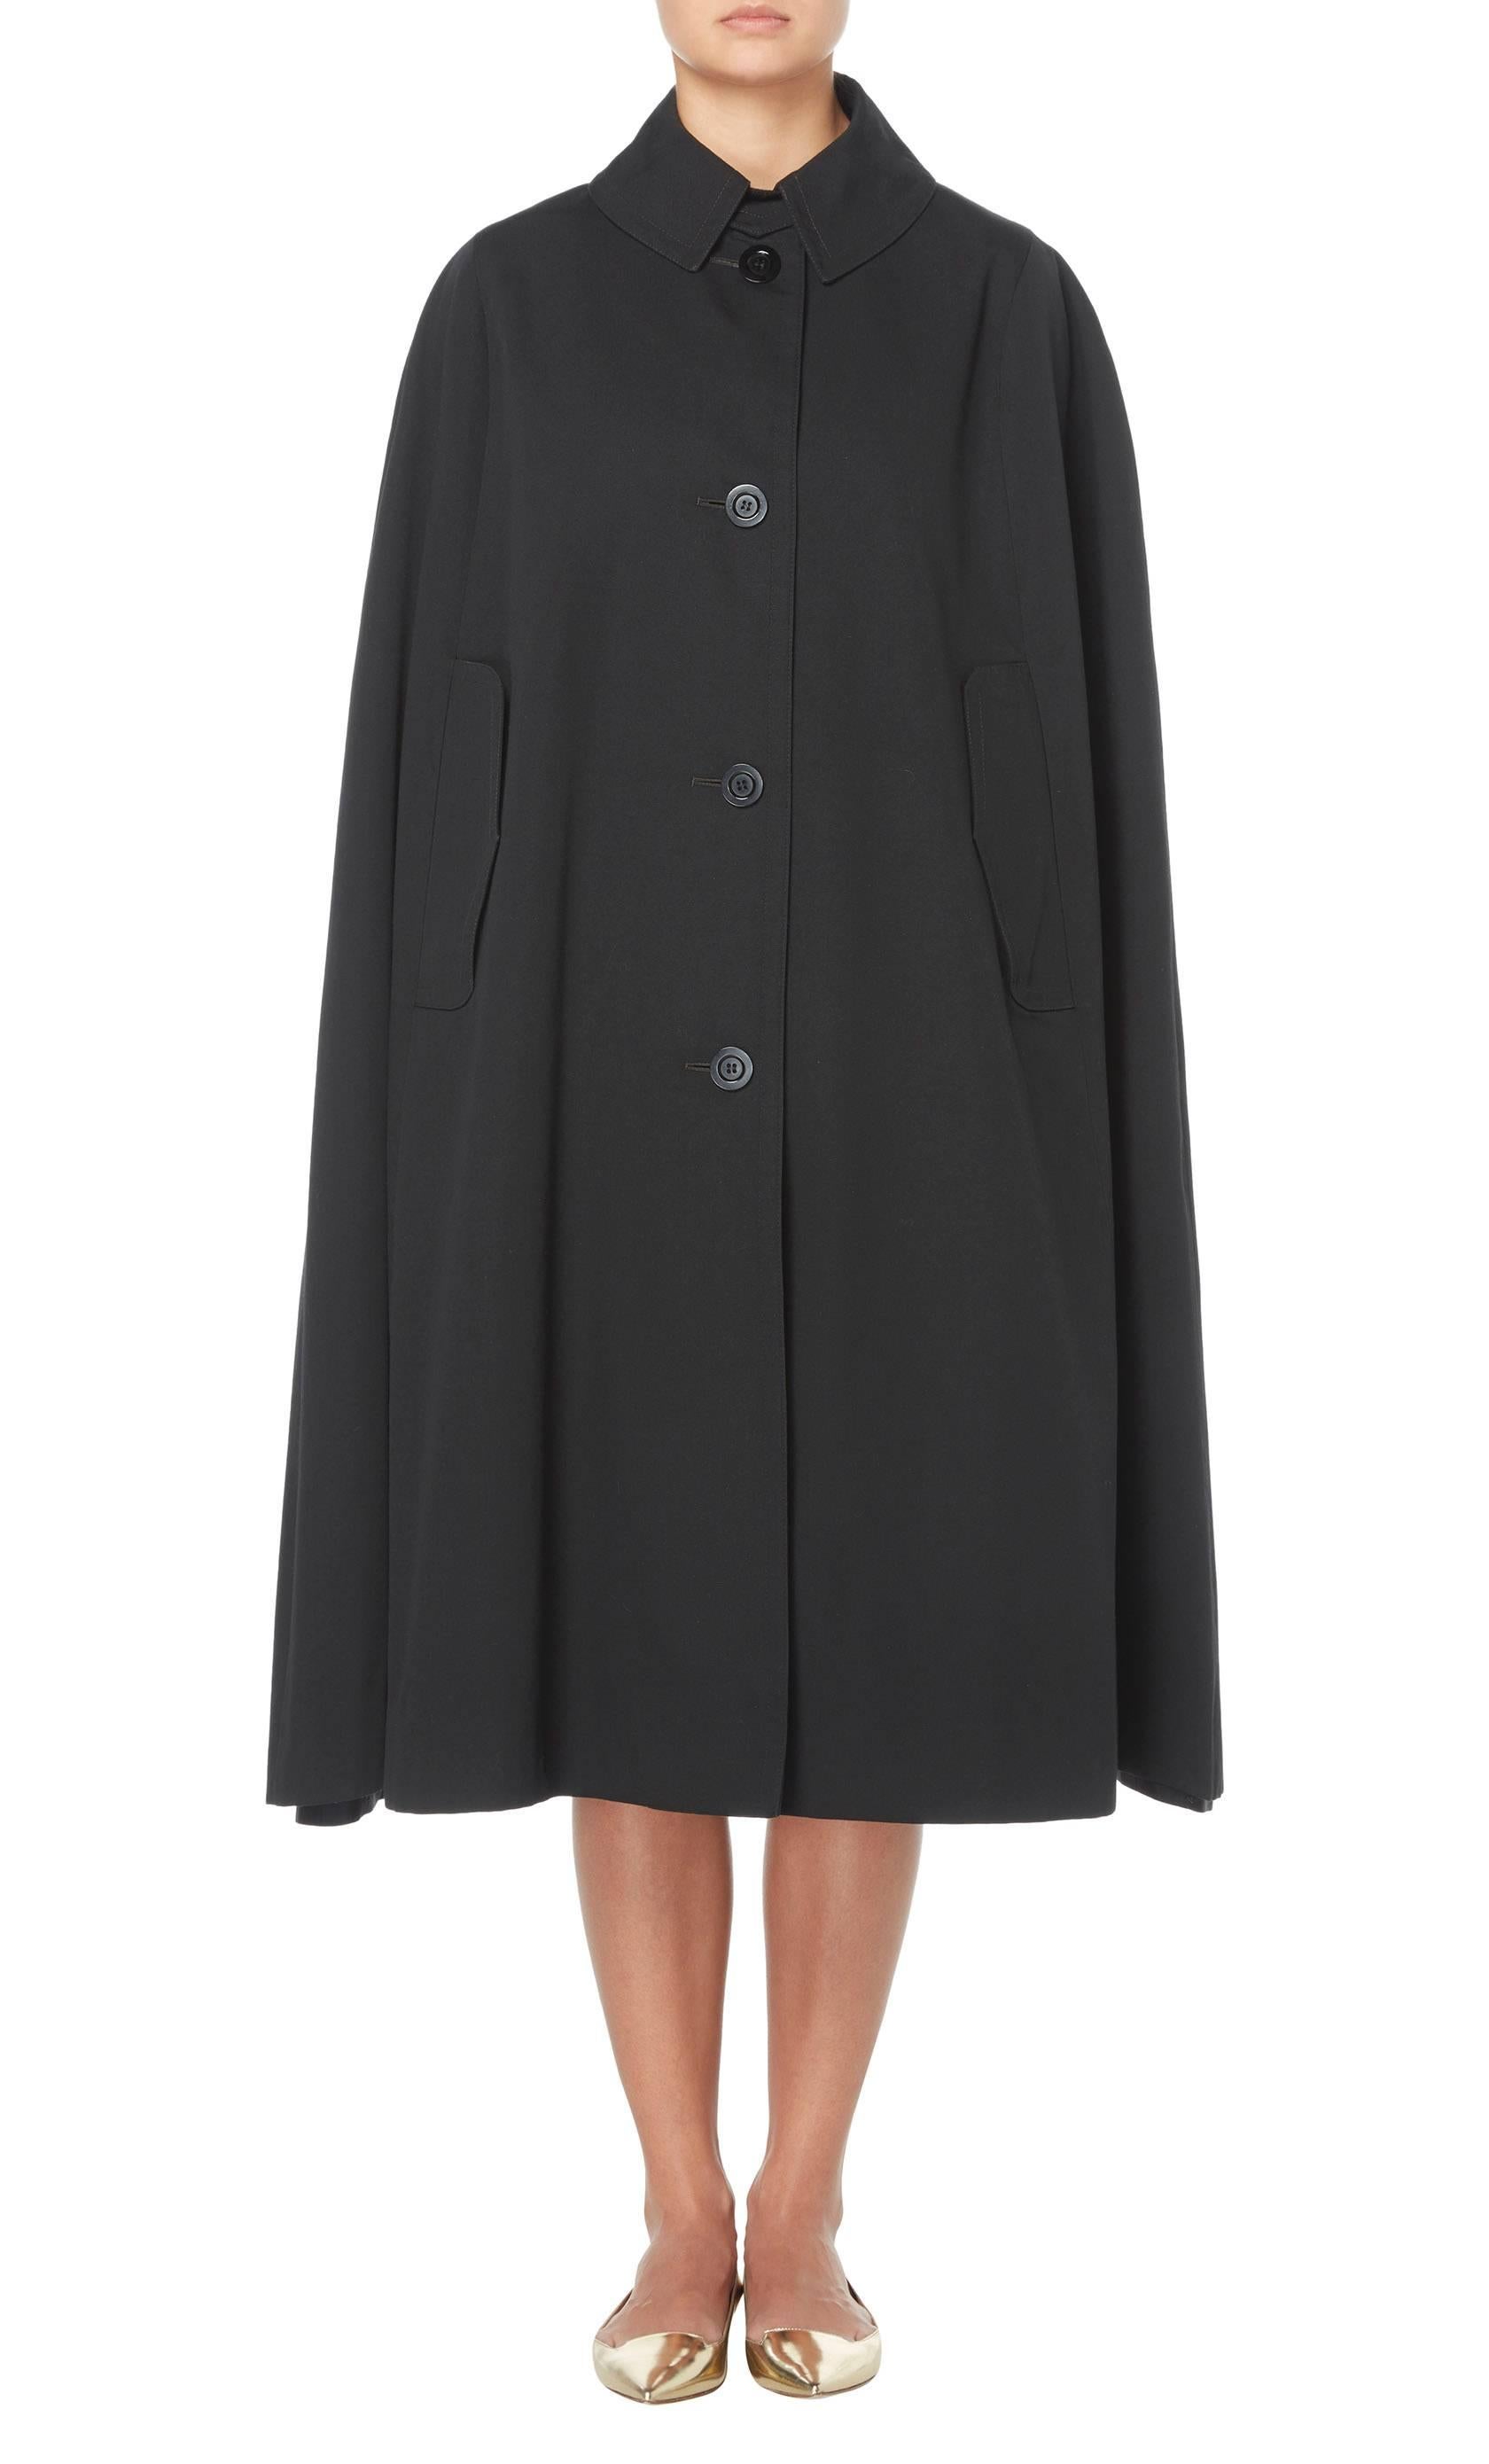 A practical piece for everyday, this Aquascutum black cape will lend a touch of chic to rainy days. Constructed in black cotton, the cape features a collar and buttons fastening to the front.

Constructed in black cotton
Featuring a collar and